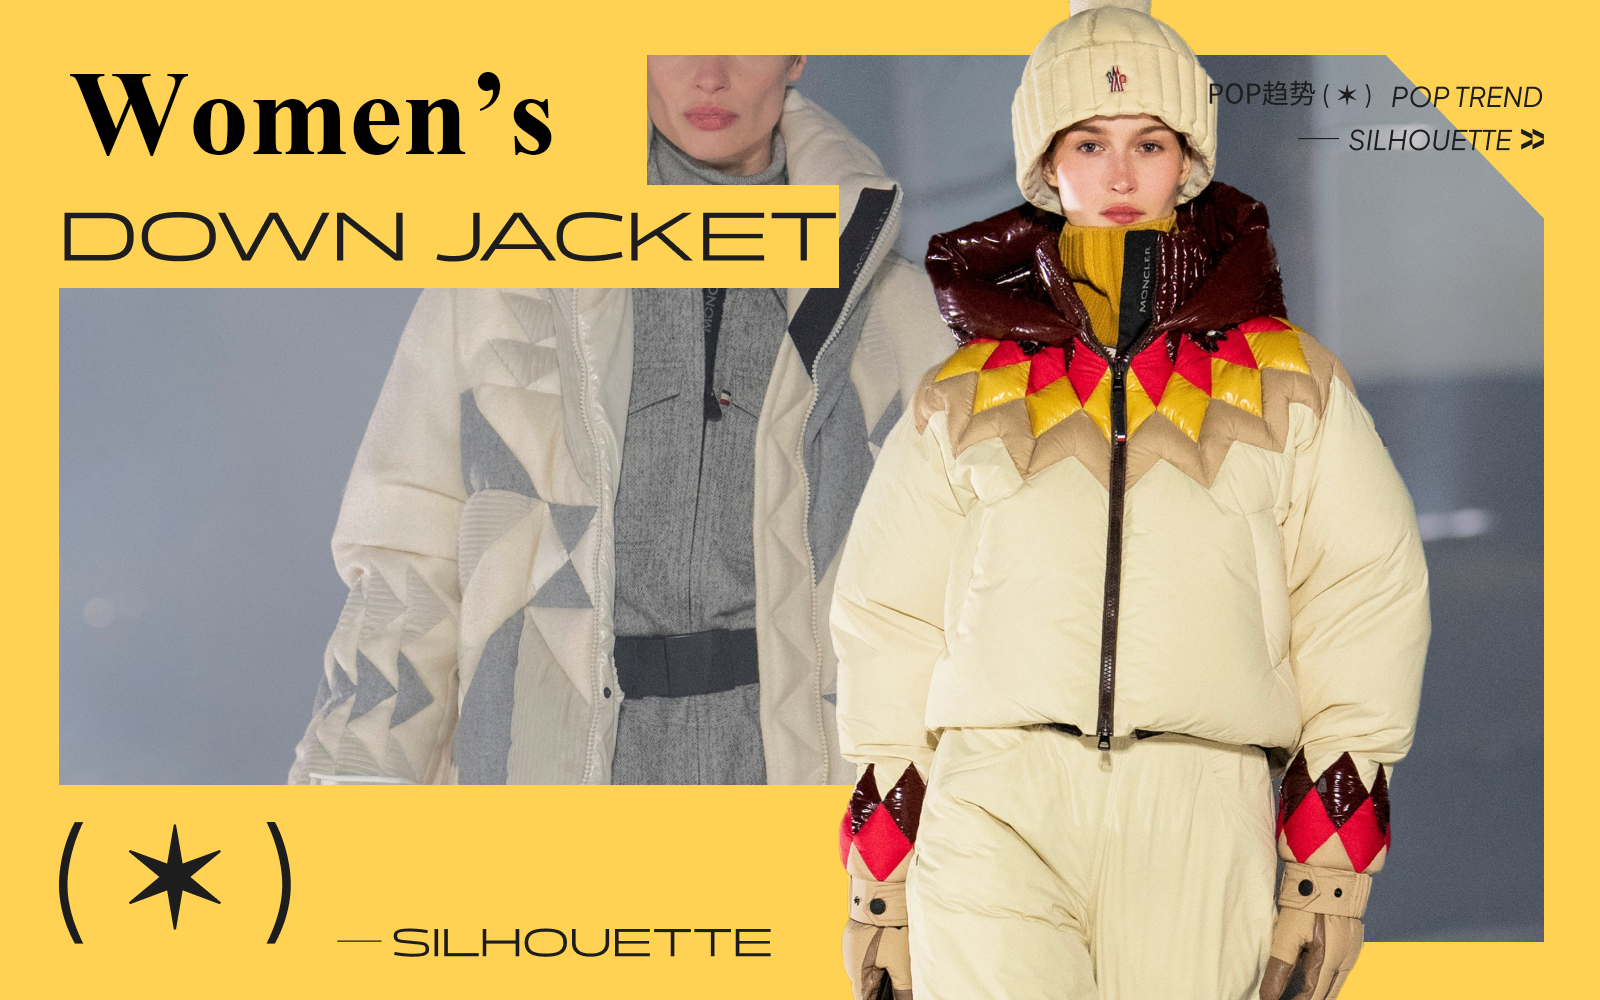 Warm Shaping -- The Silhouette Trend for Women's Down Jacket